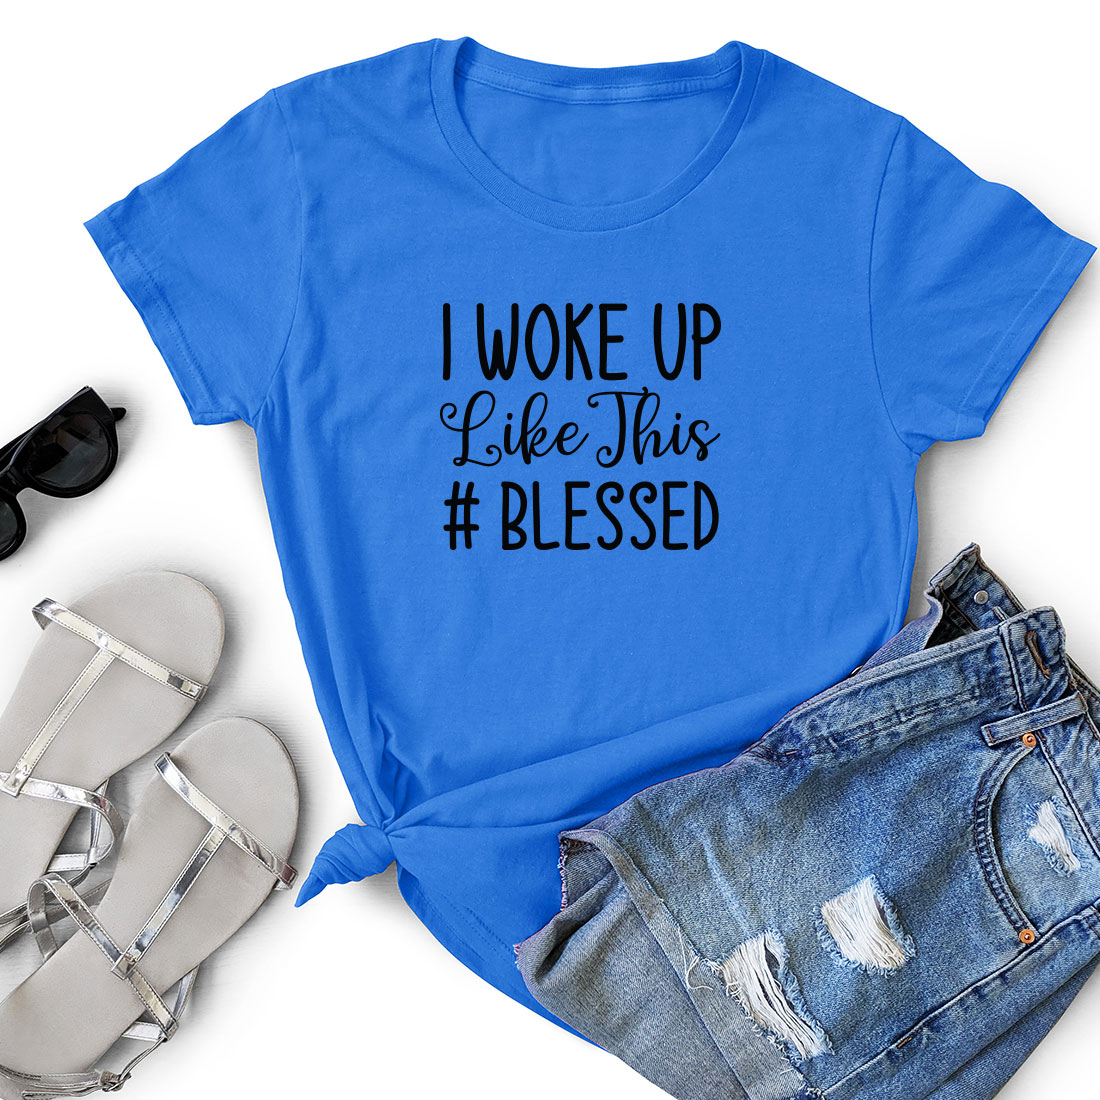 T - shirt that says i woke up like this is messed.